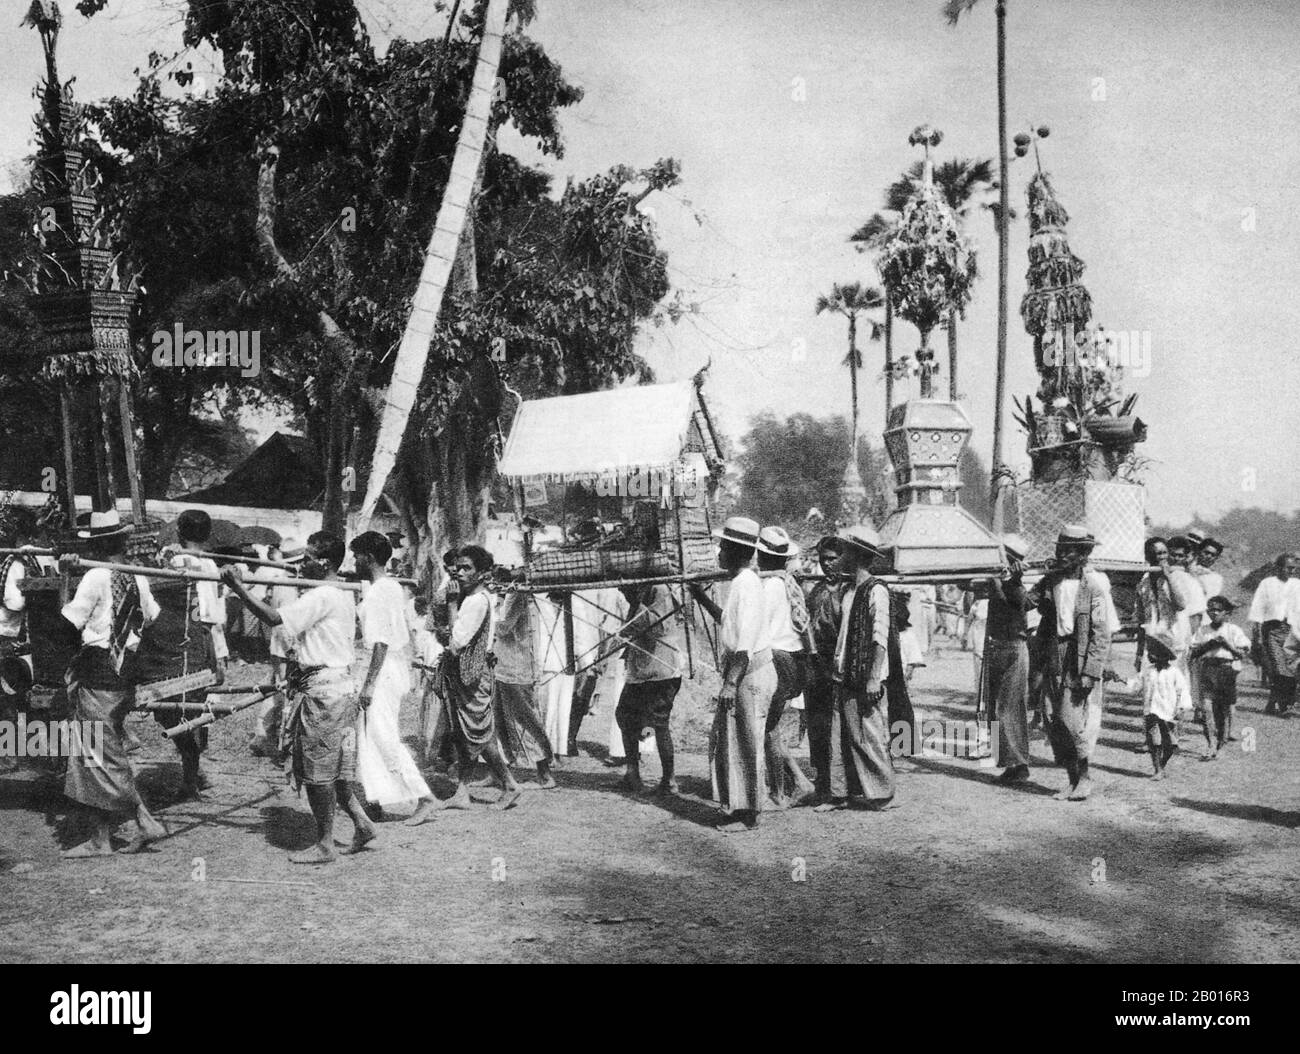 Thailand: A festival procession enters the front gates of Wat Phra That Haripunchai, Lamphun, c. 1920.  Wat Phra That Haripunchai was founded in 1044 by King Athitayarat of Haripunchai on the site of Queen Chamathewi's (Chama Thewi or Chamadevi) royal palace. Legend has it that the queen's personal quarters are enclosed in the main 46-metre high Lan Na-style chedi, covered in copper plates and topped by a gold umbrella or plee.   Lamphun was the capital of the small but culturally rich Mon Kingdom of Haripunchai from about 750 CE to the time of its conquest by King Mangrai in 1281. Stock Photo